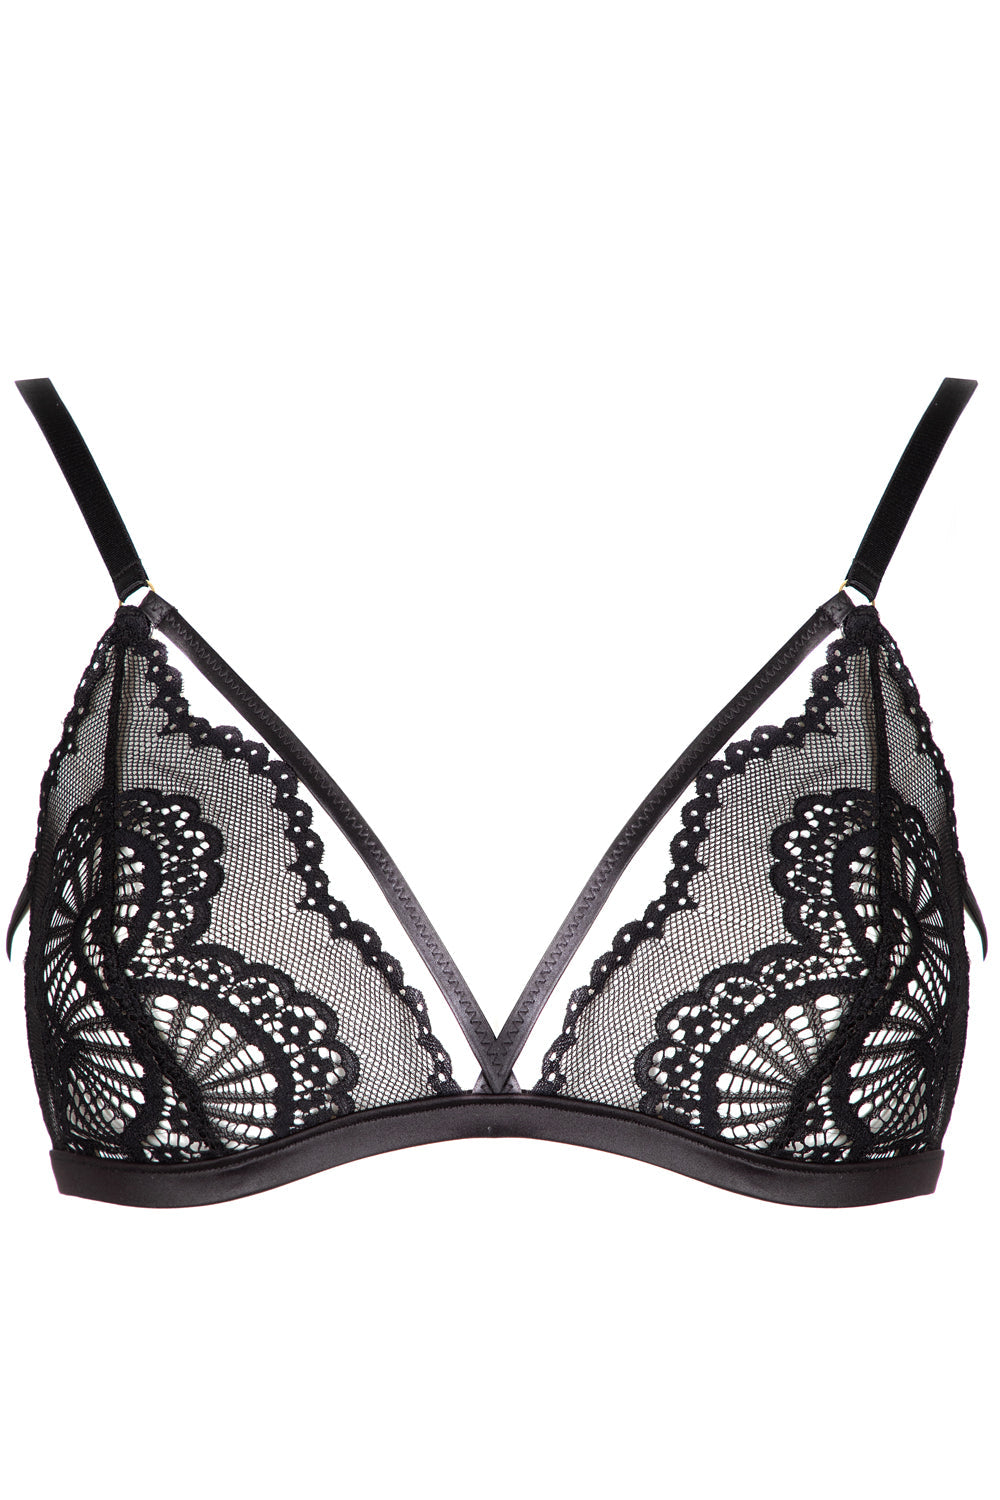 Jolidon The Lover Triangle Bra Ghost Front